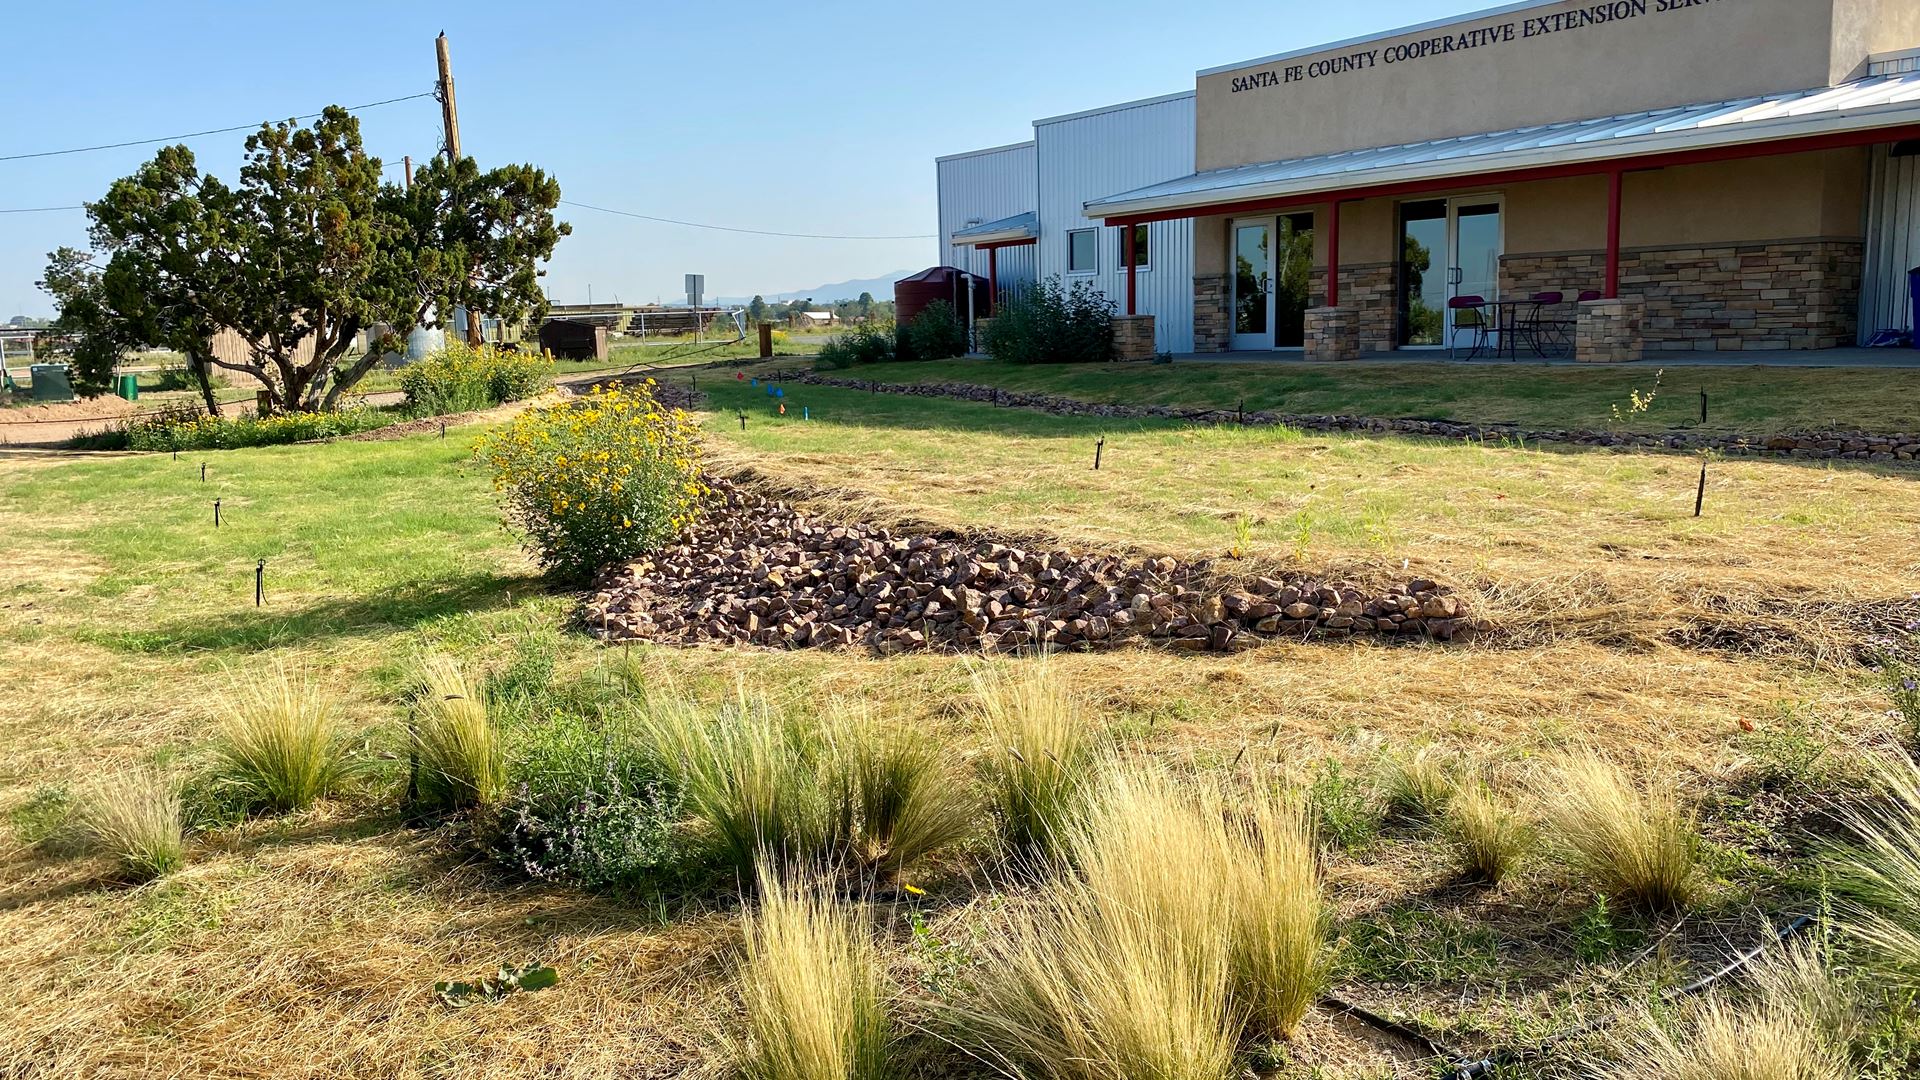 Native plant gardens take shape at NMSU Cooperative Extension Office in Santa Fe County